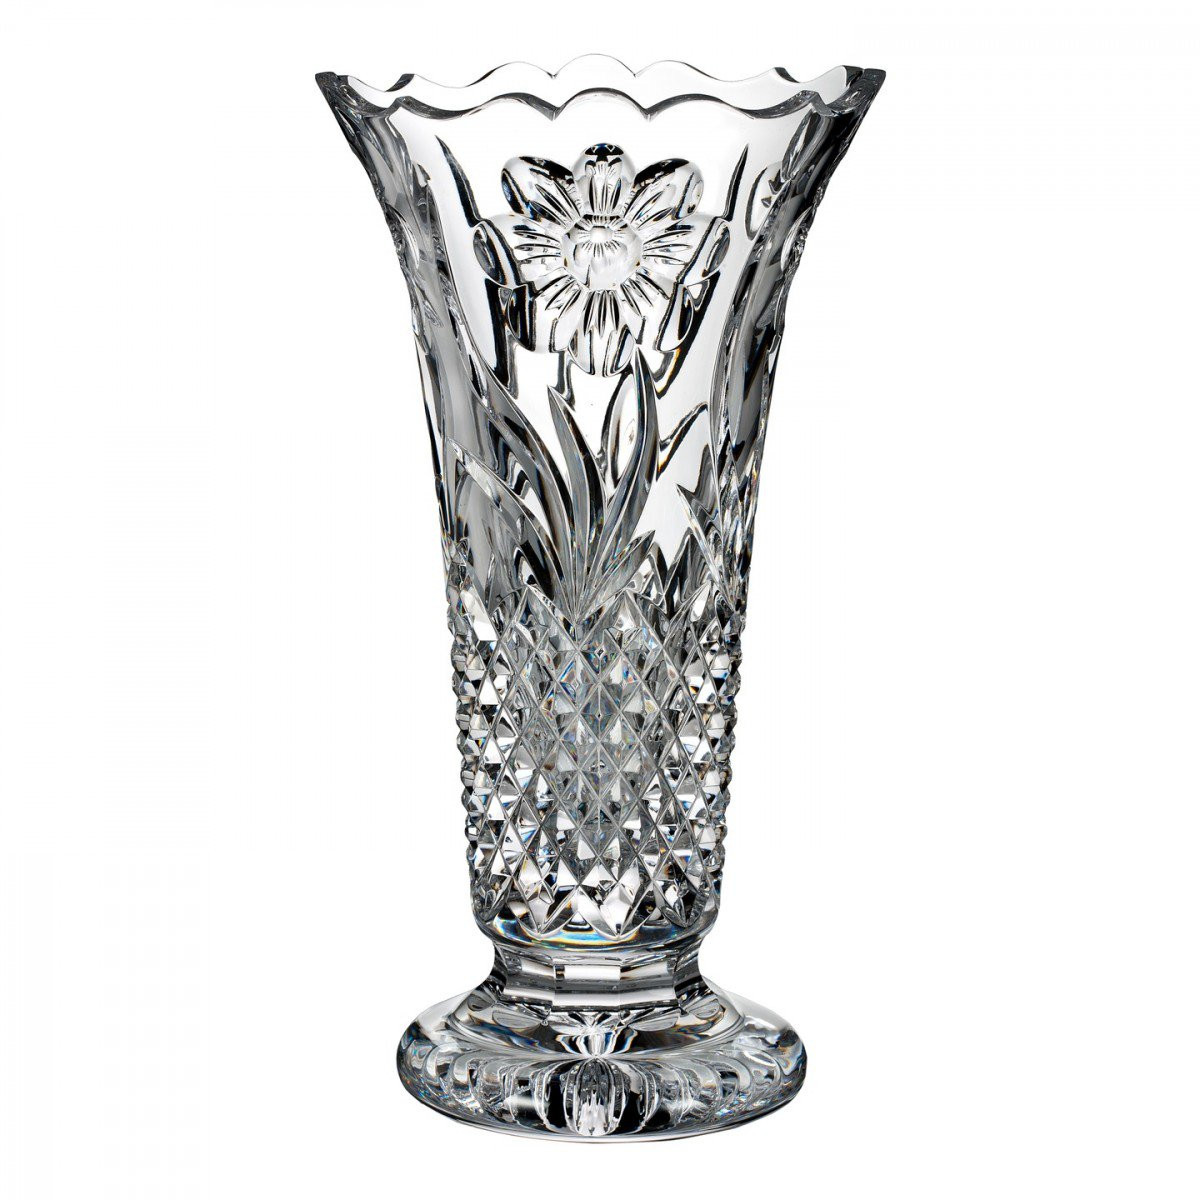 13 Lovable Waterford Marquis Markham Vase 2024 free download waterford marquis markham vase of flora fauna magnolia 12in vase house of waterford crystal us intended for flora fauna magnolia 12in vase